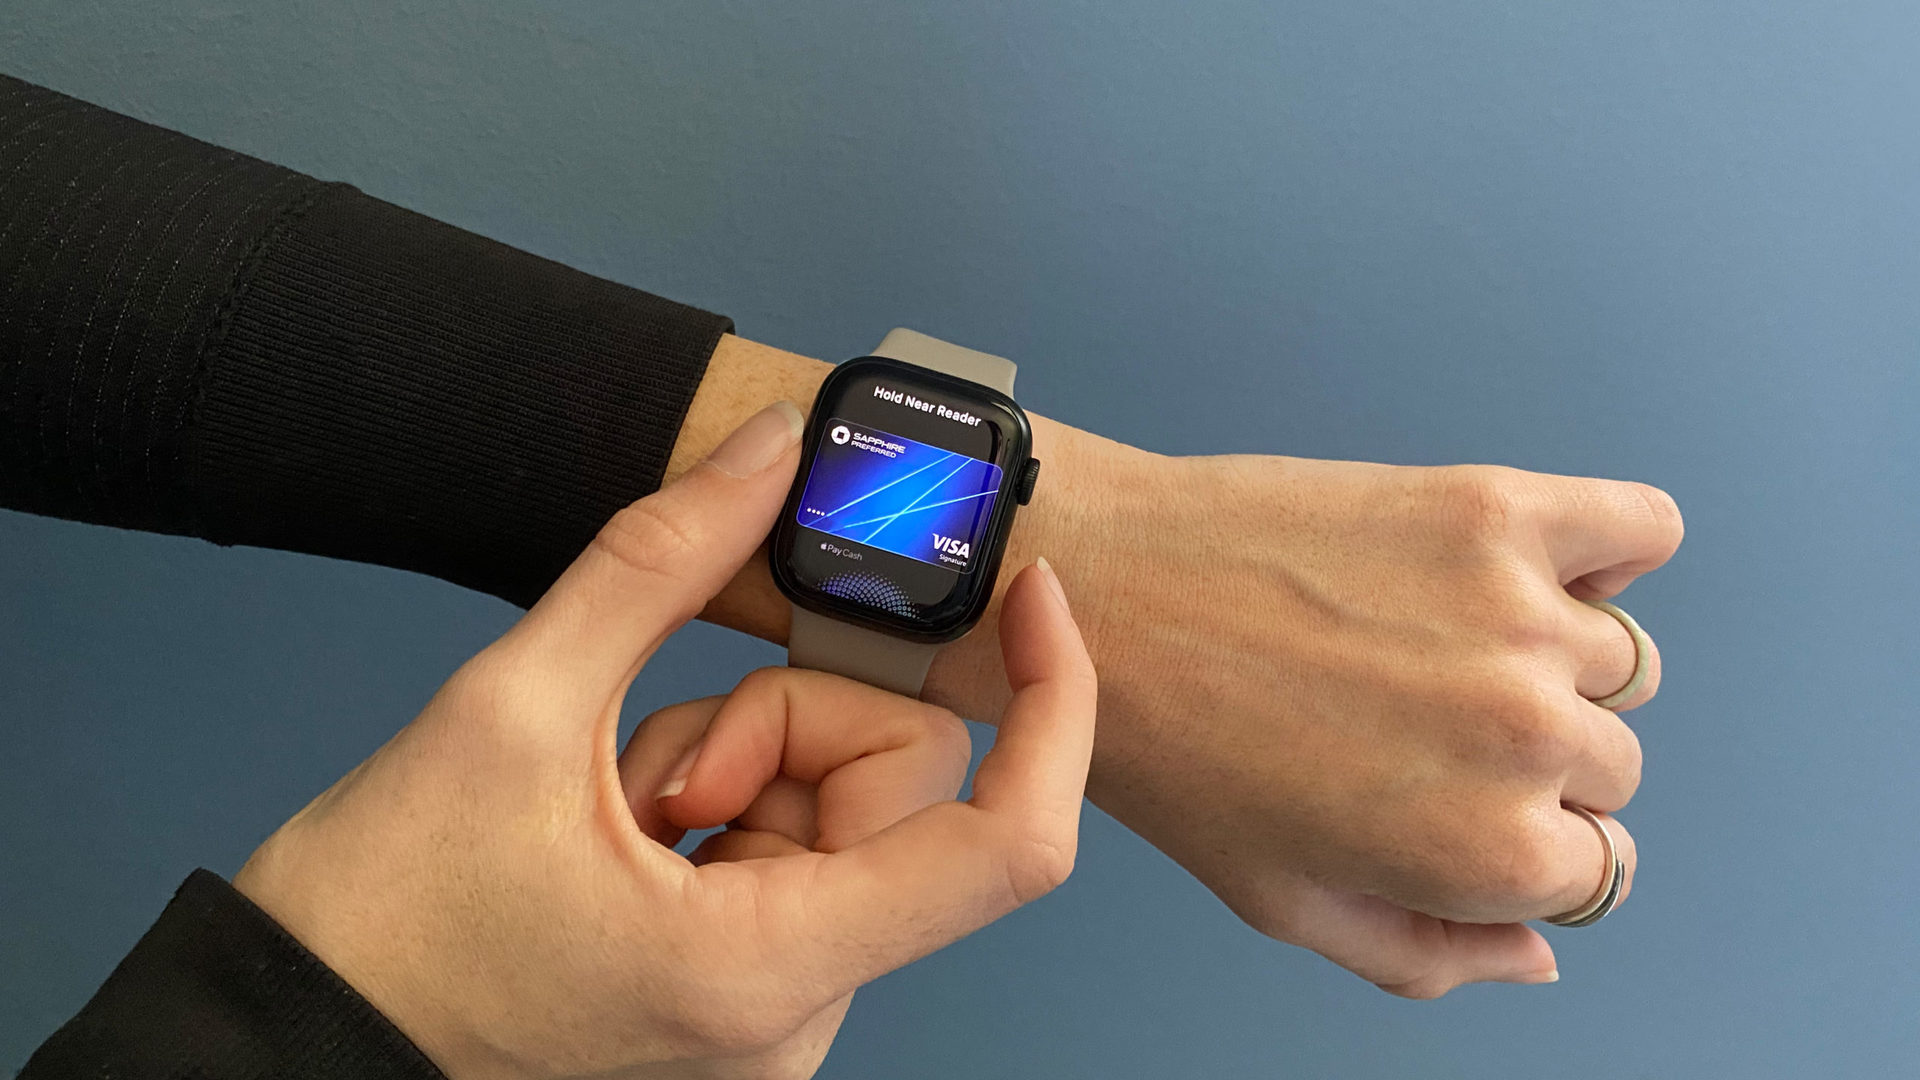 A user activates ApplePay on her Apple Watch by double tapping the side button.